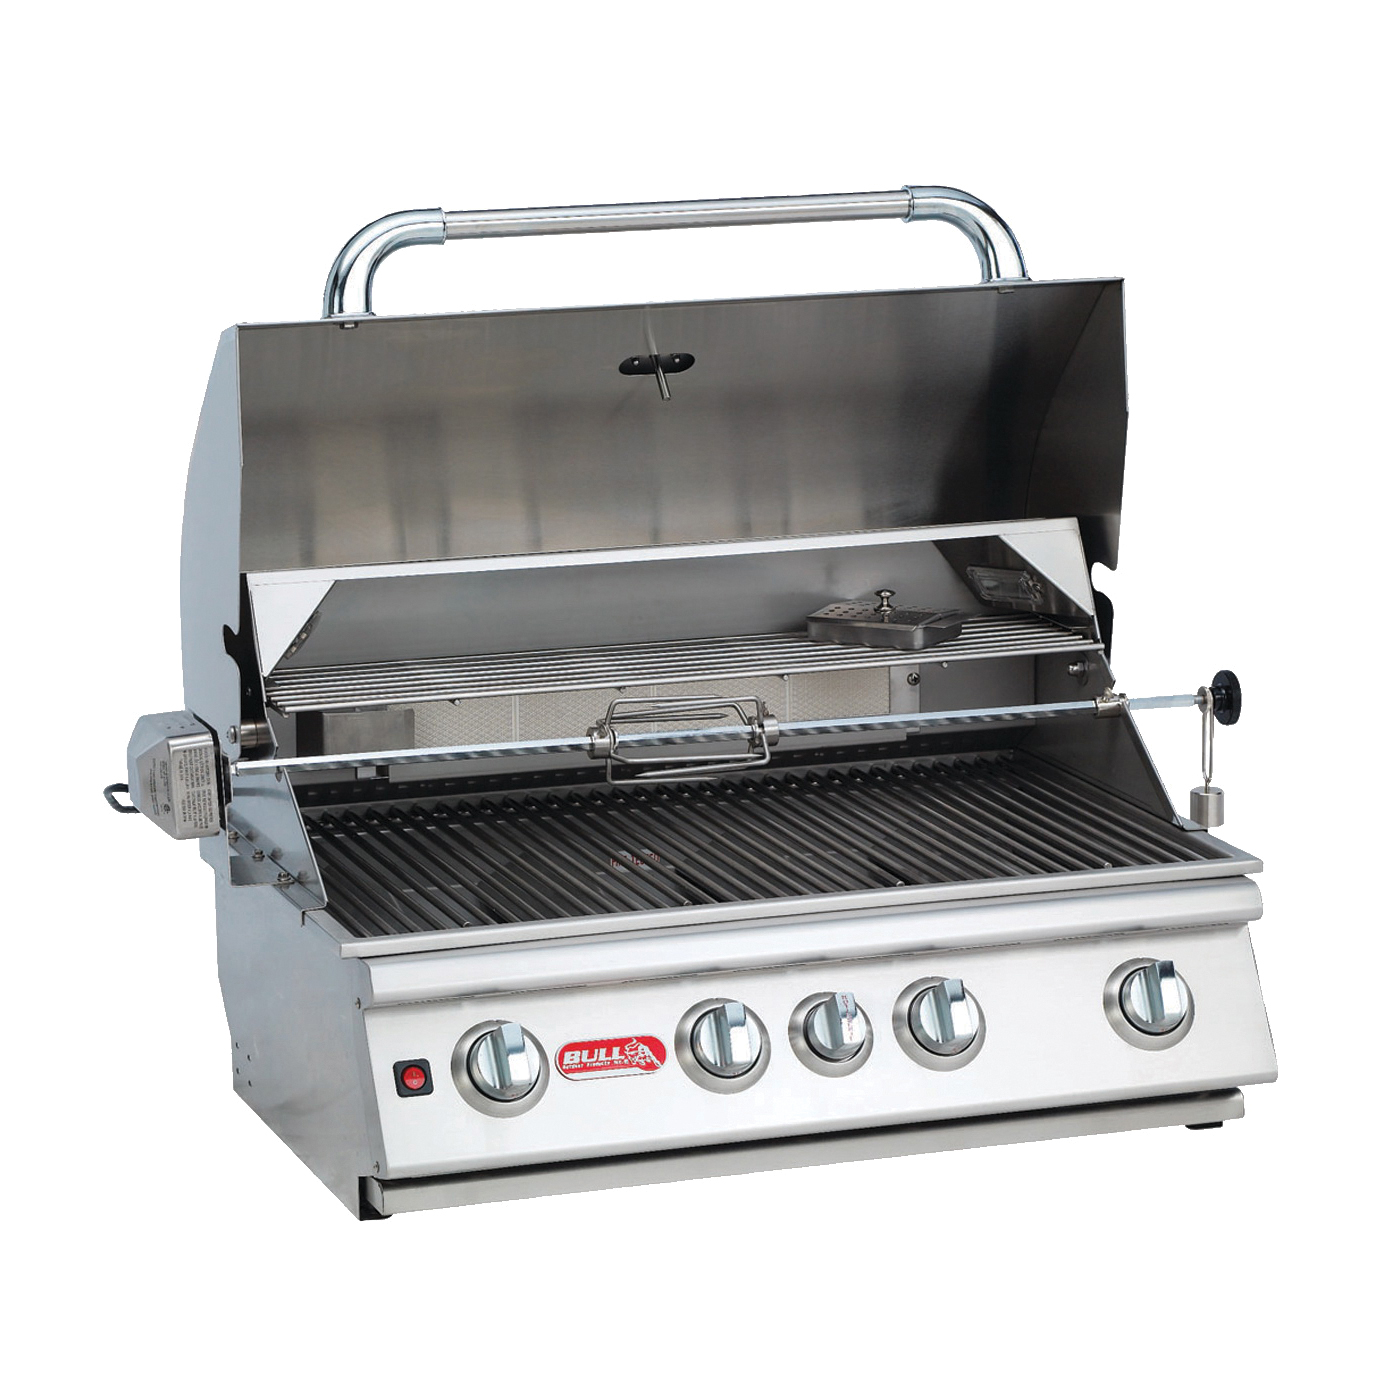 Angus 47628 Gas Grill Head, 75000 Btu, LP, 4-Burner, 210 sq-in Secondary Cooking Surface, Stainless Steel Body